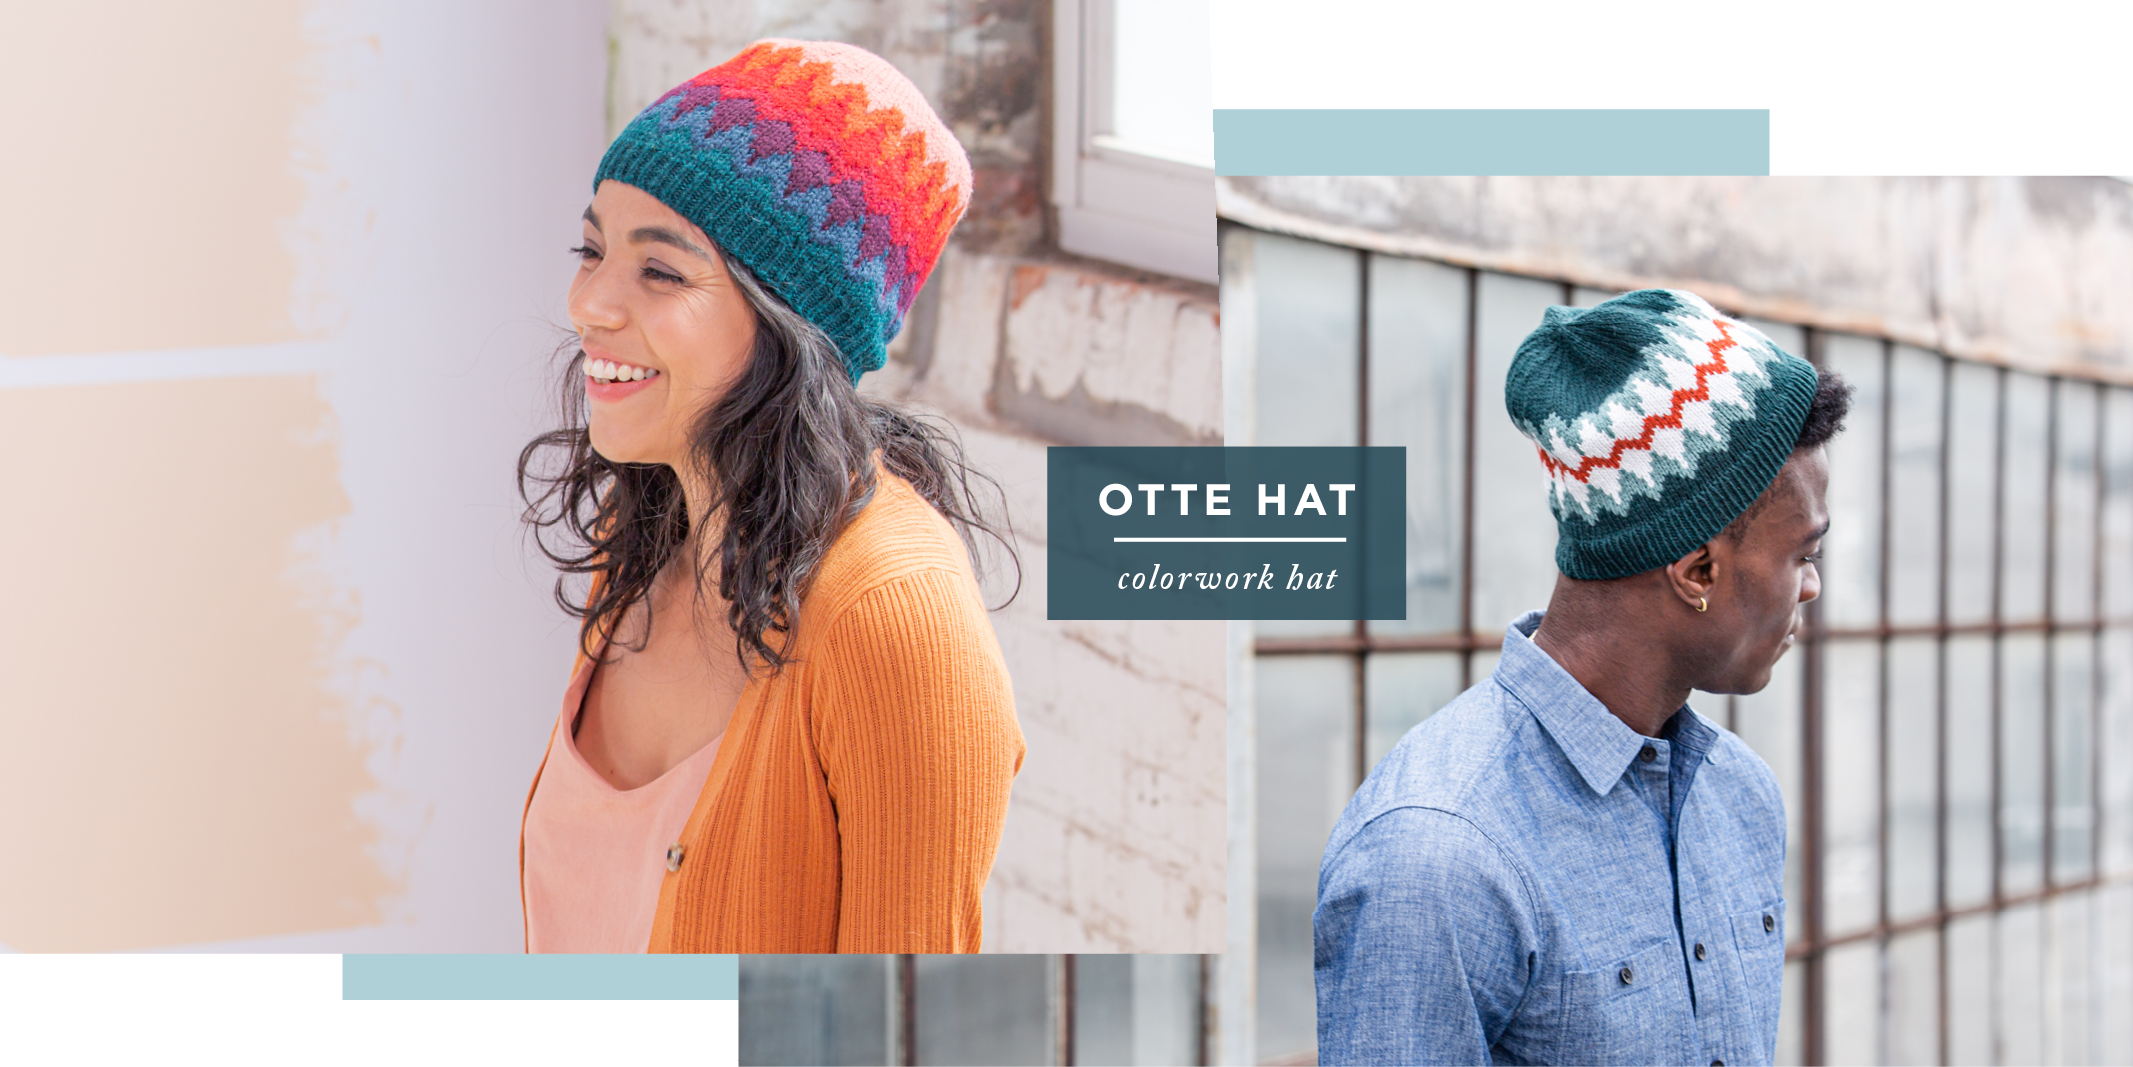 Two images showing modeled side views of two versions of Otte Hat: colorwork hat